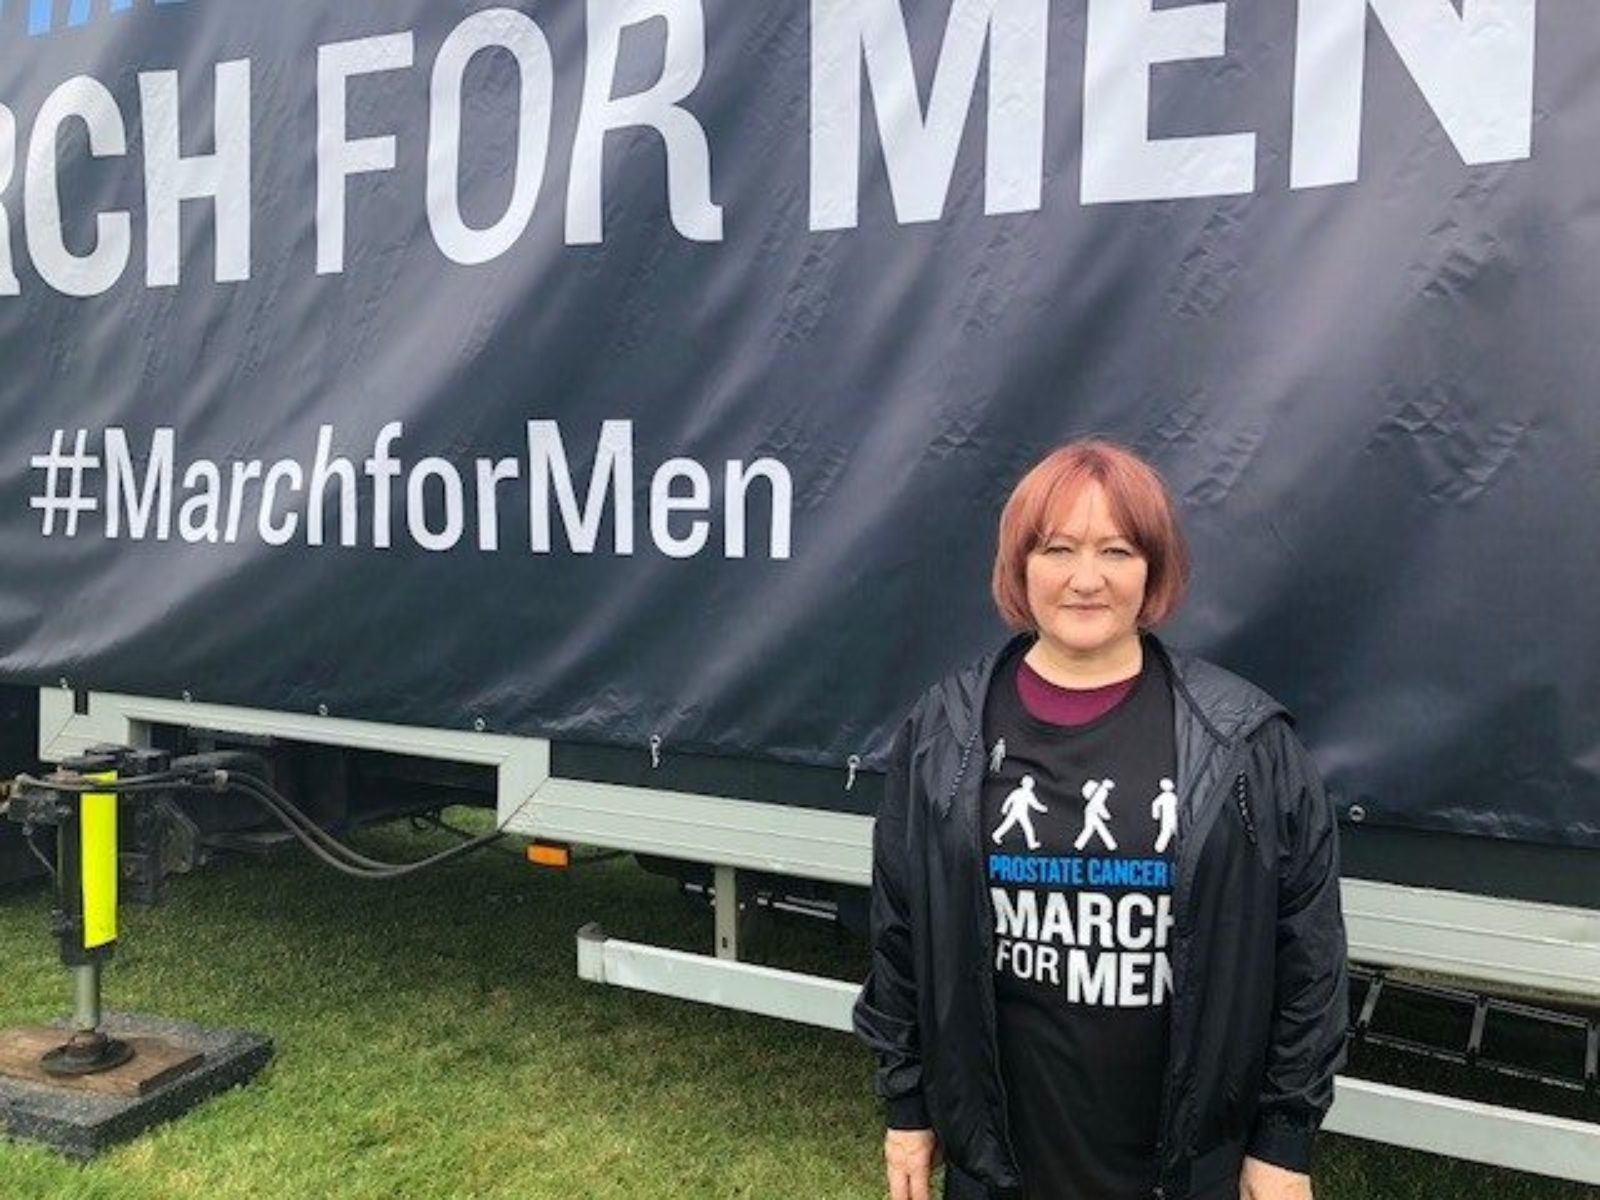 Kerry at the March for Men in aid of Prostate Cancer UK.